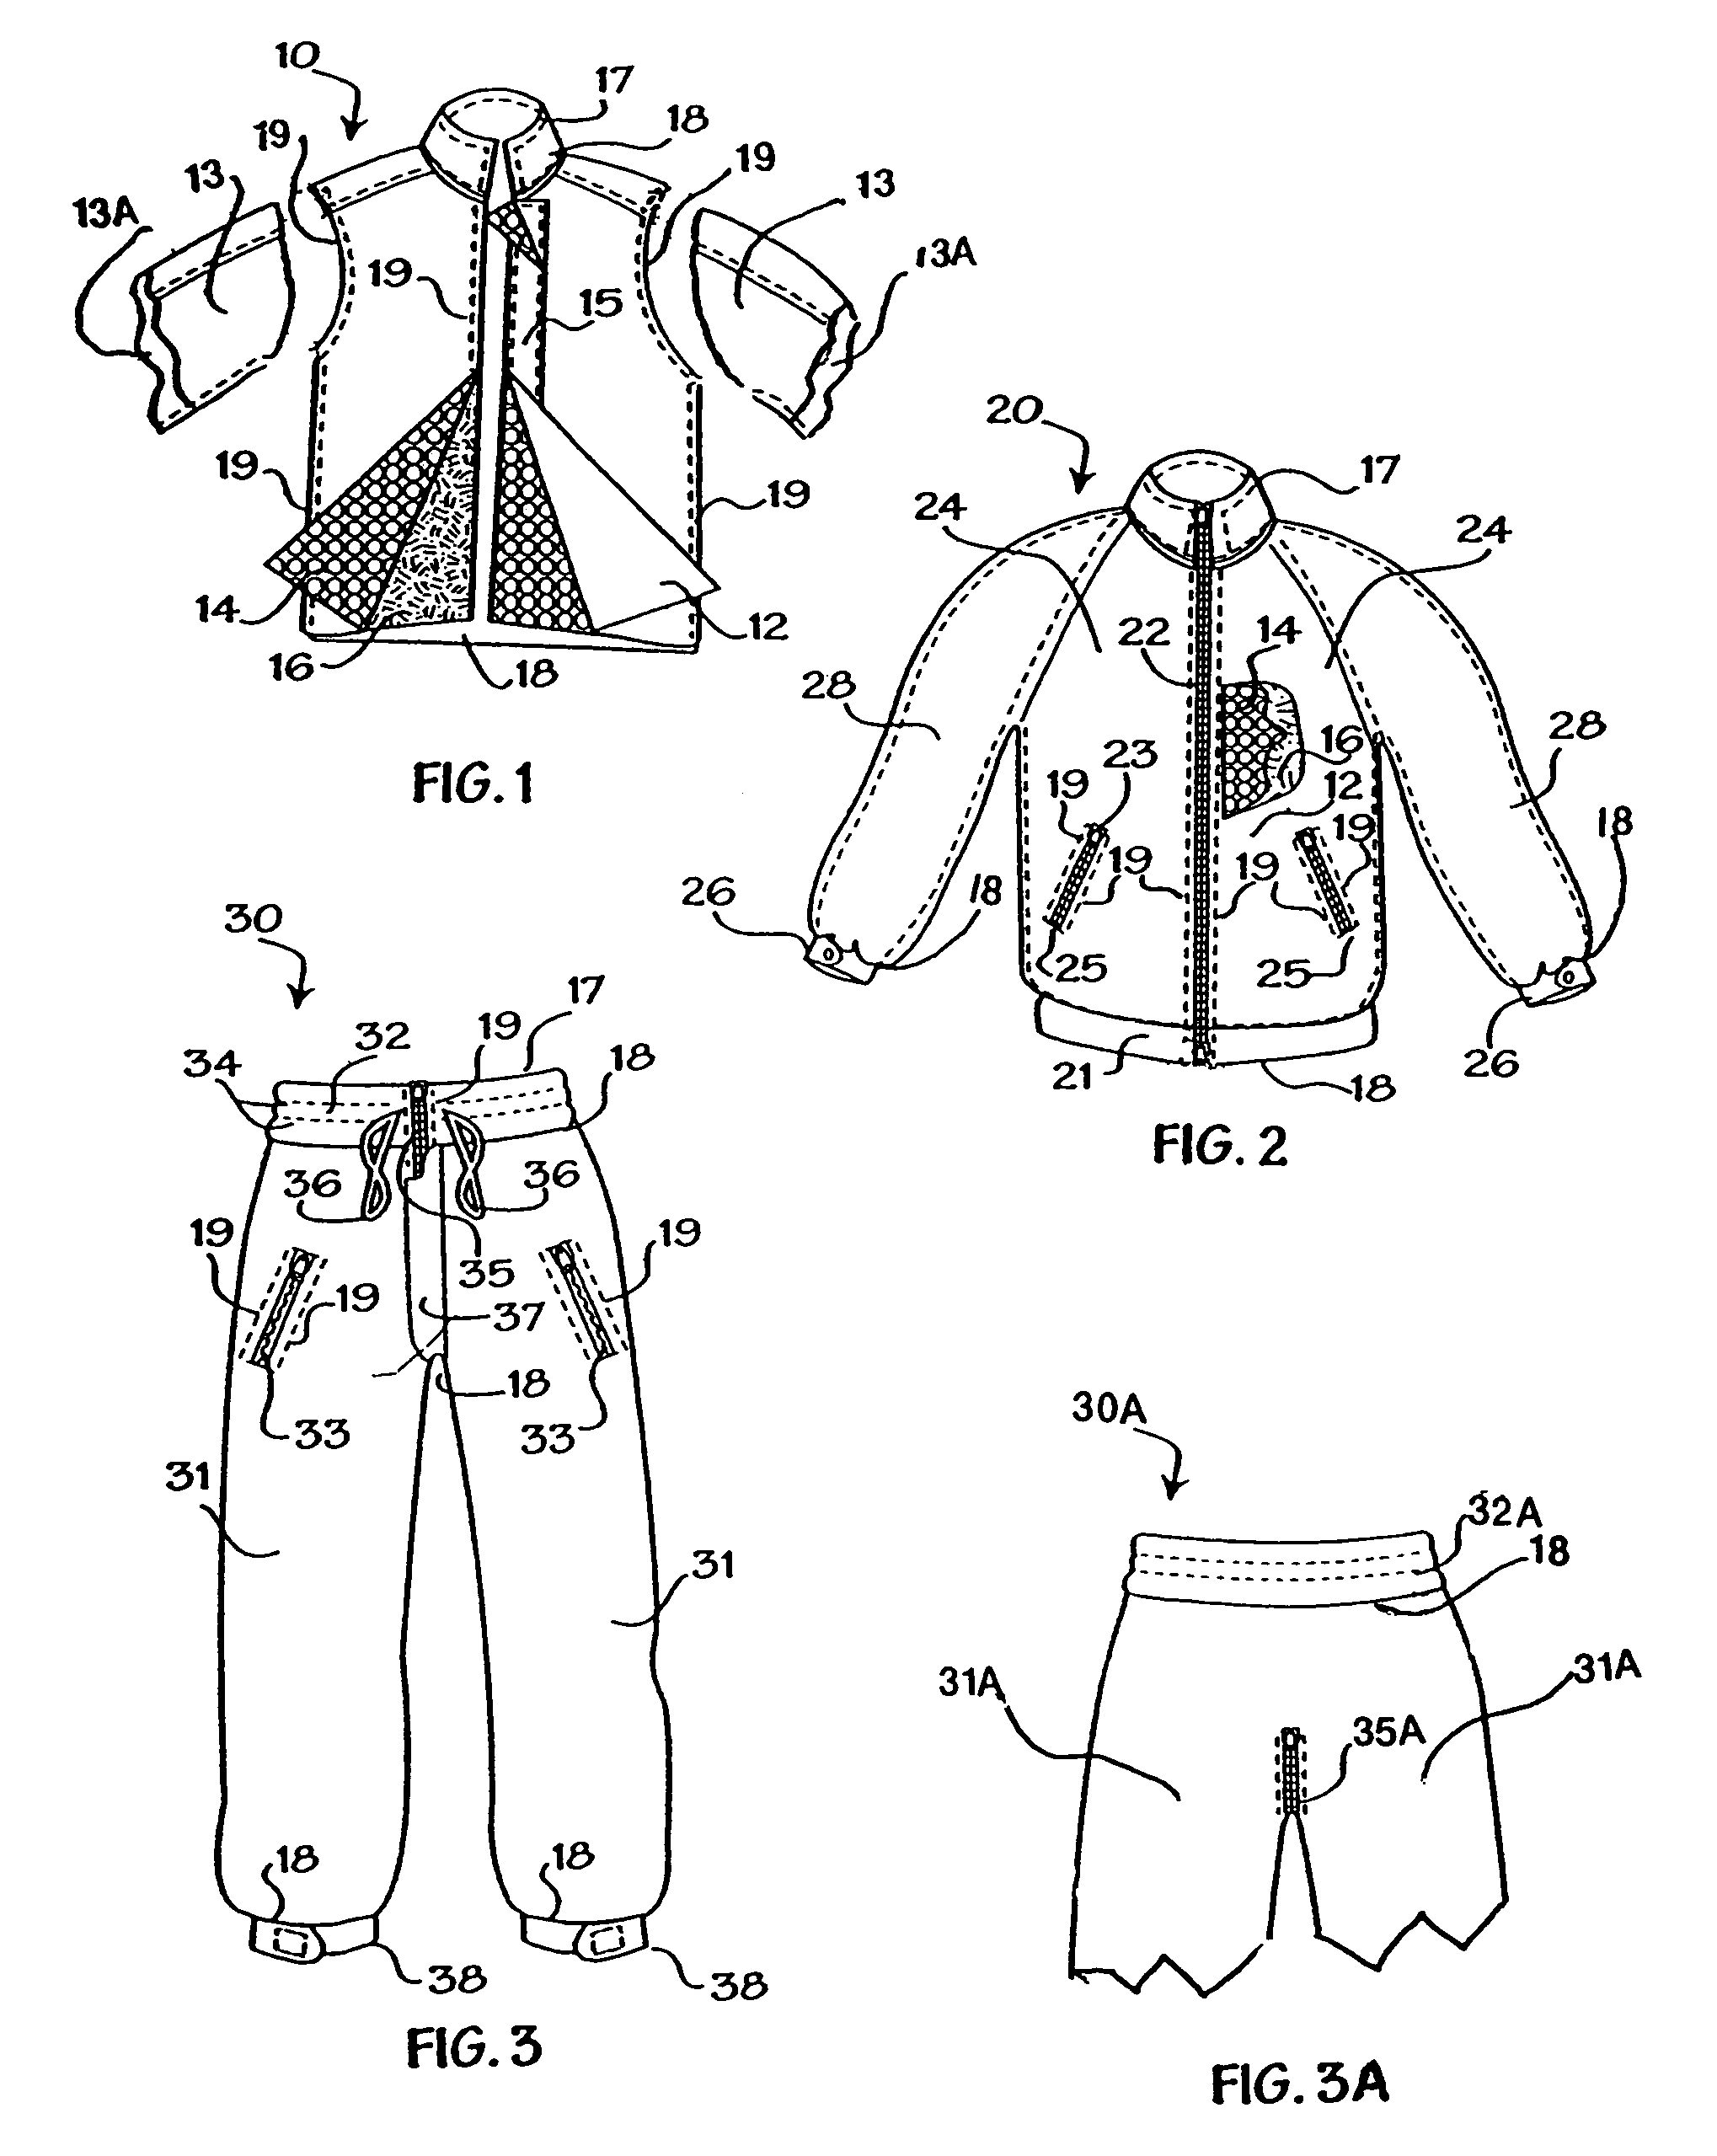 Liner and garment ensemble for thermal wear and anti-exposure suits